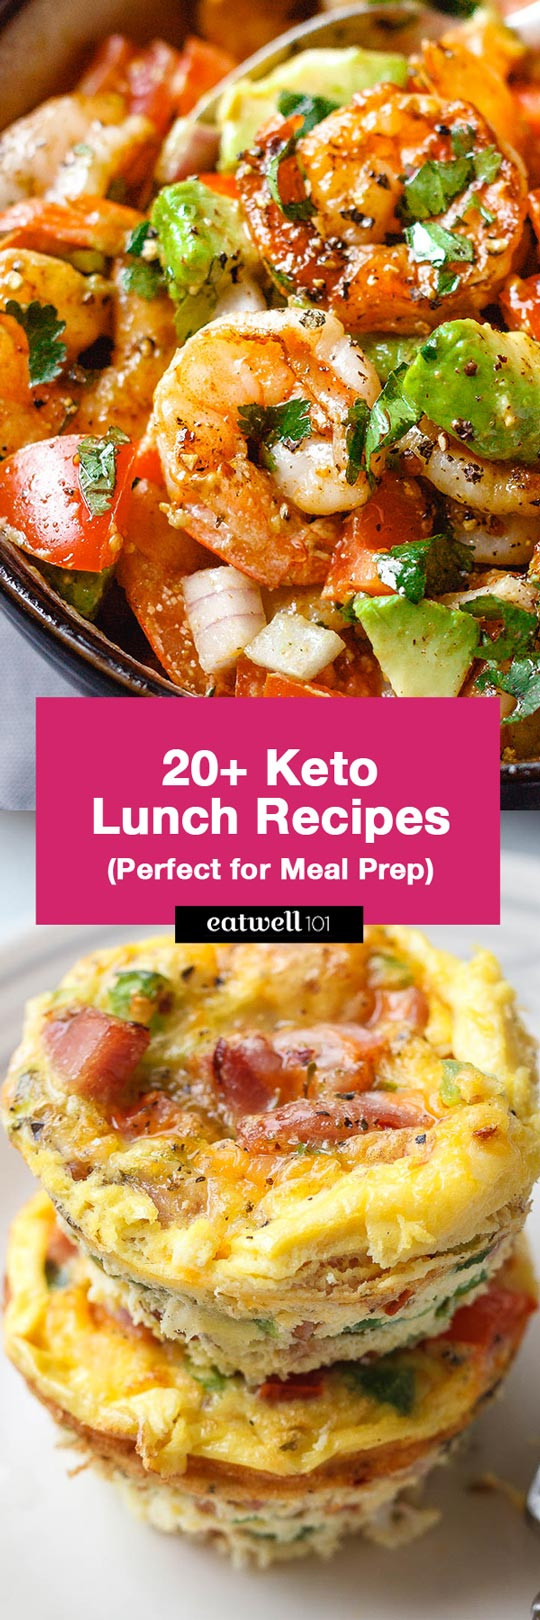 Keto Diet Meal Prep Lunch Ideas
 Keto Lunch Recipes 22 Best Keto Lunch Ideas for Meal Prep